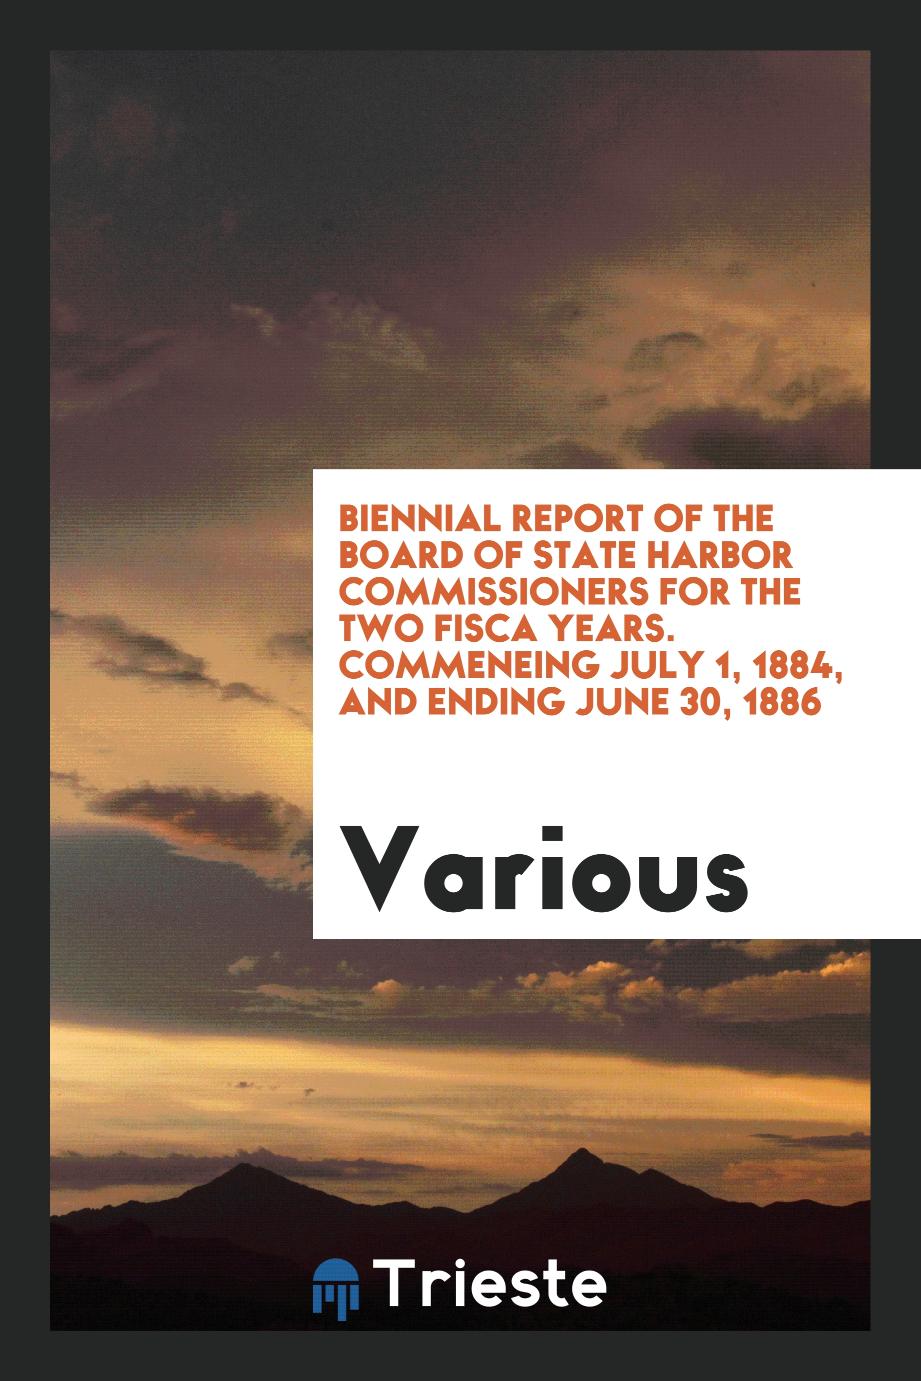 Biennial report of the Board of State Harbor Commissioners for the two fisca years. Commeneing July 1, 1884, and Ending June 30, 1886